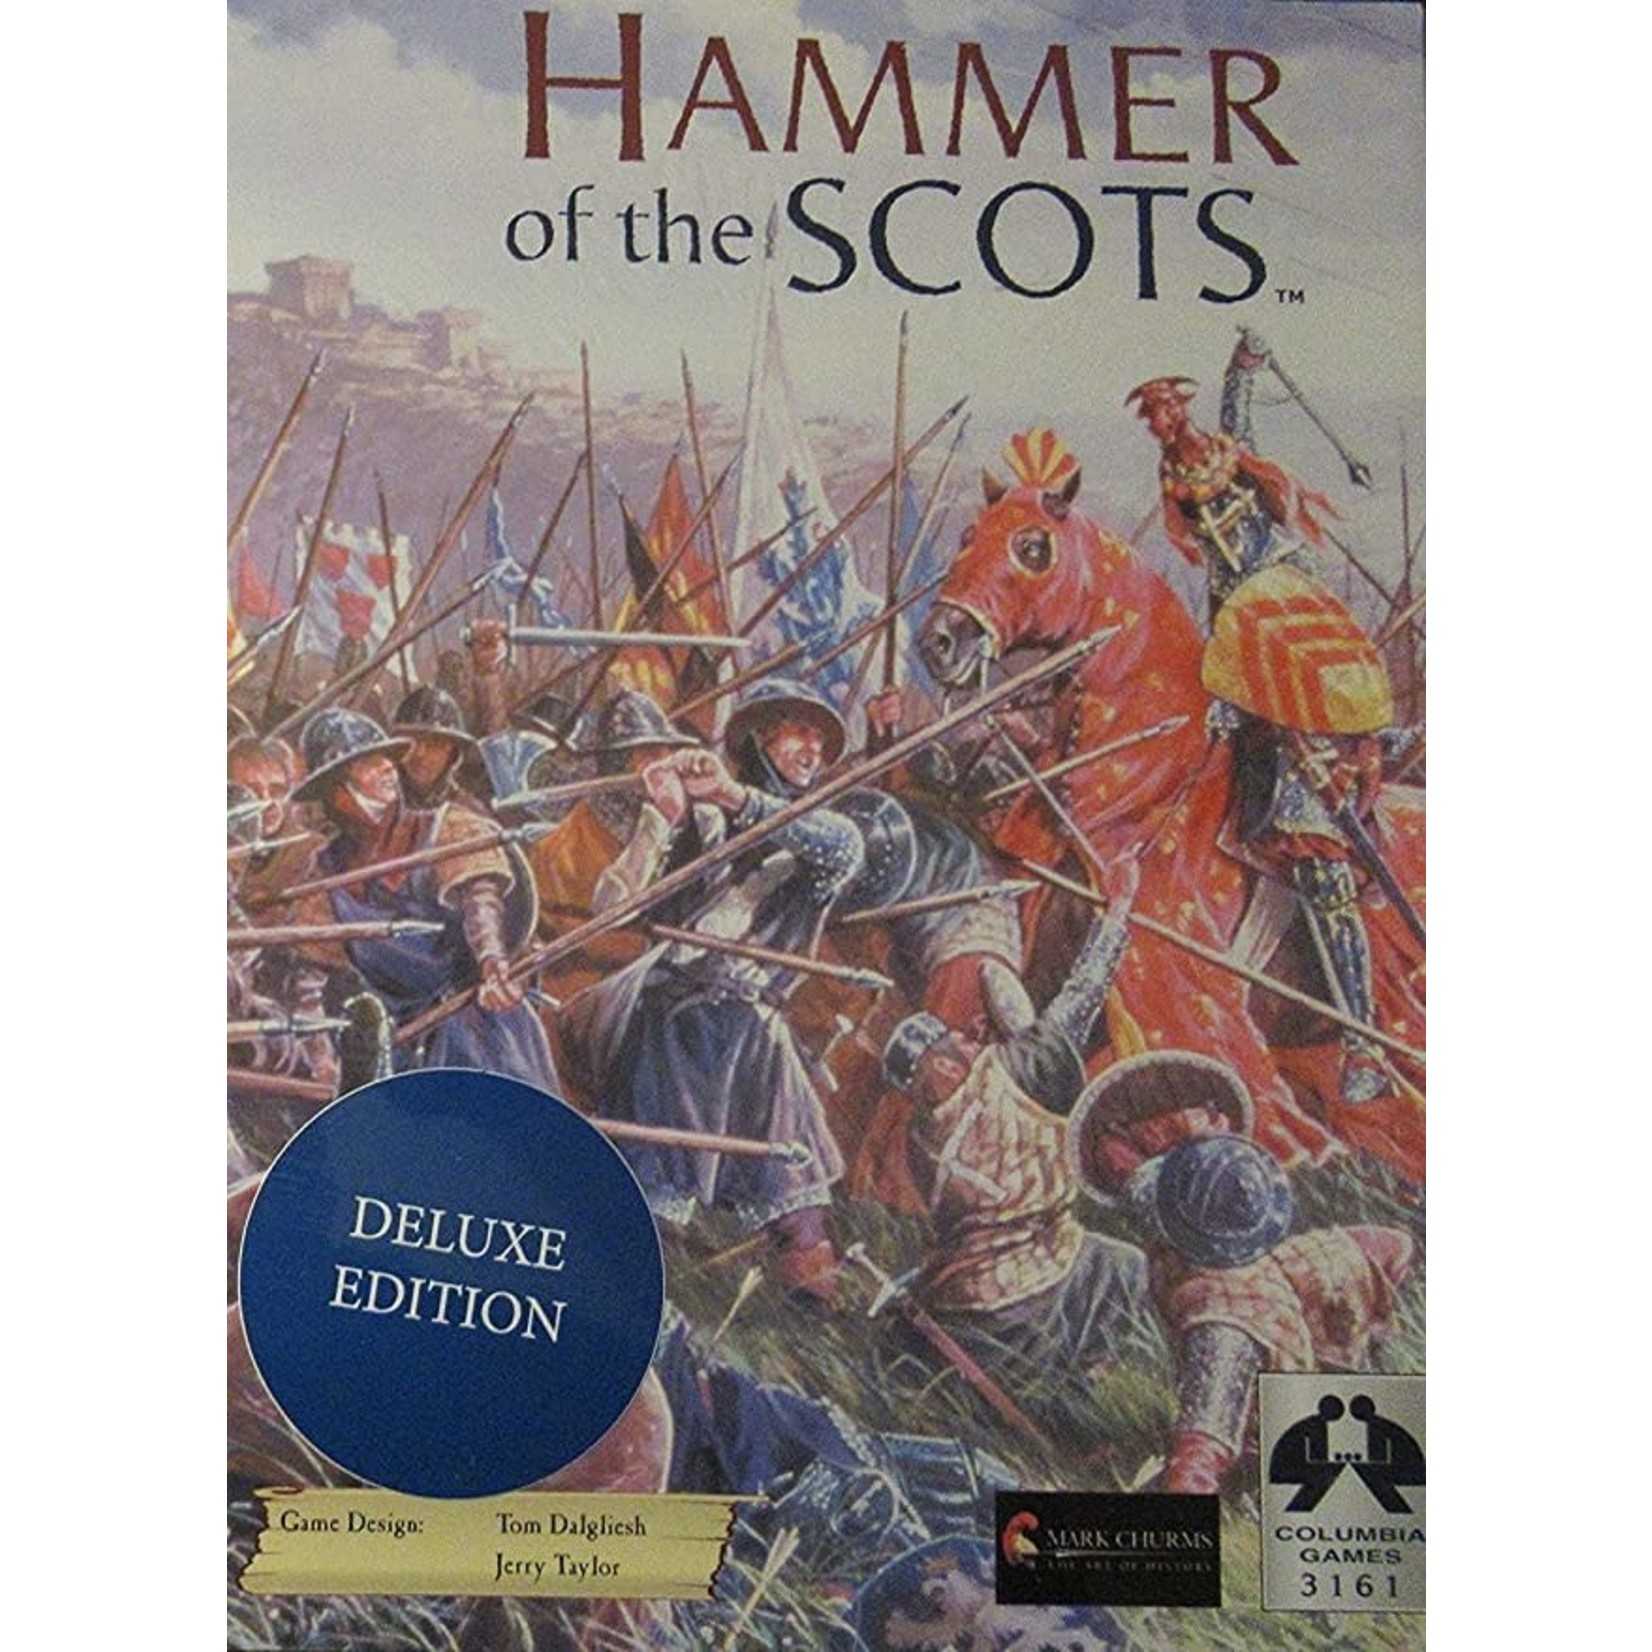 Columbia Games Hammer of the Scots (Deluxe, Third Edition)